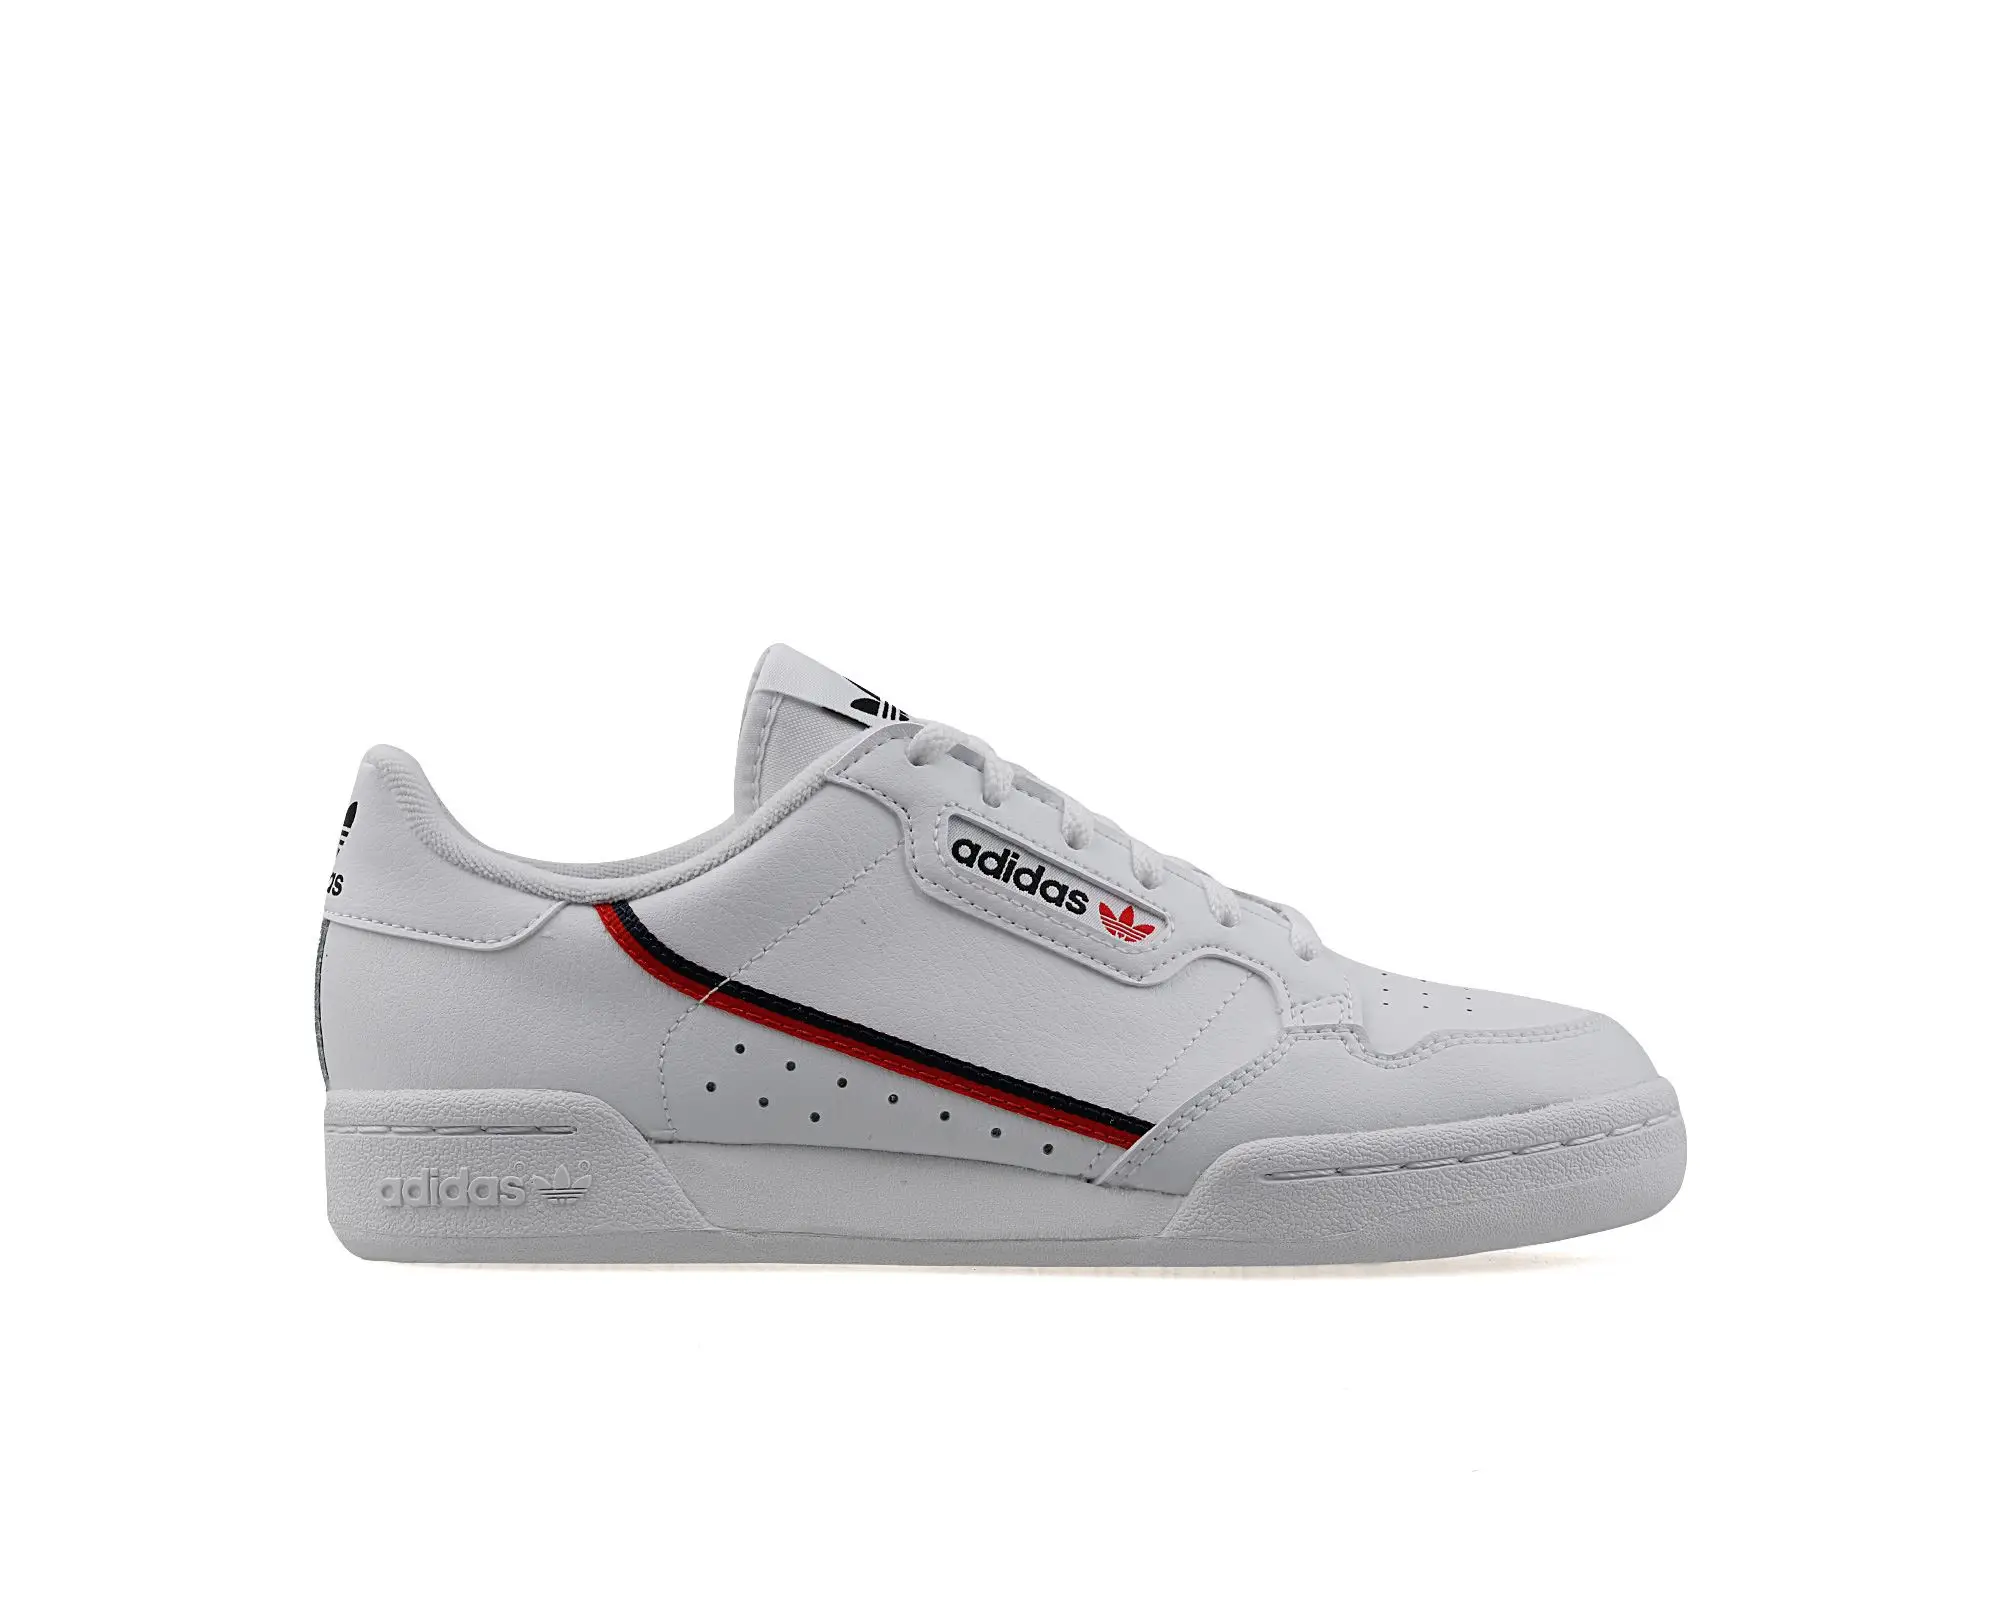 Adidas Original Continental 80 J White Kids Shoes Unisex Girls & Boys Casual Sneakers